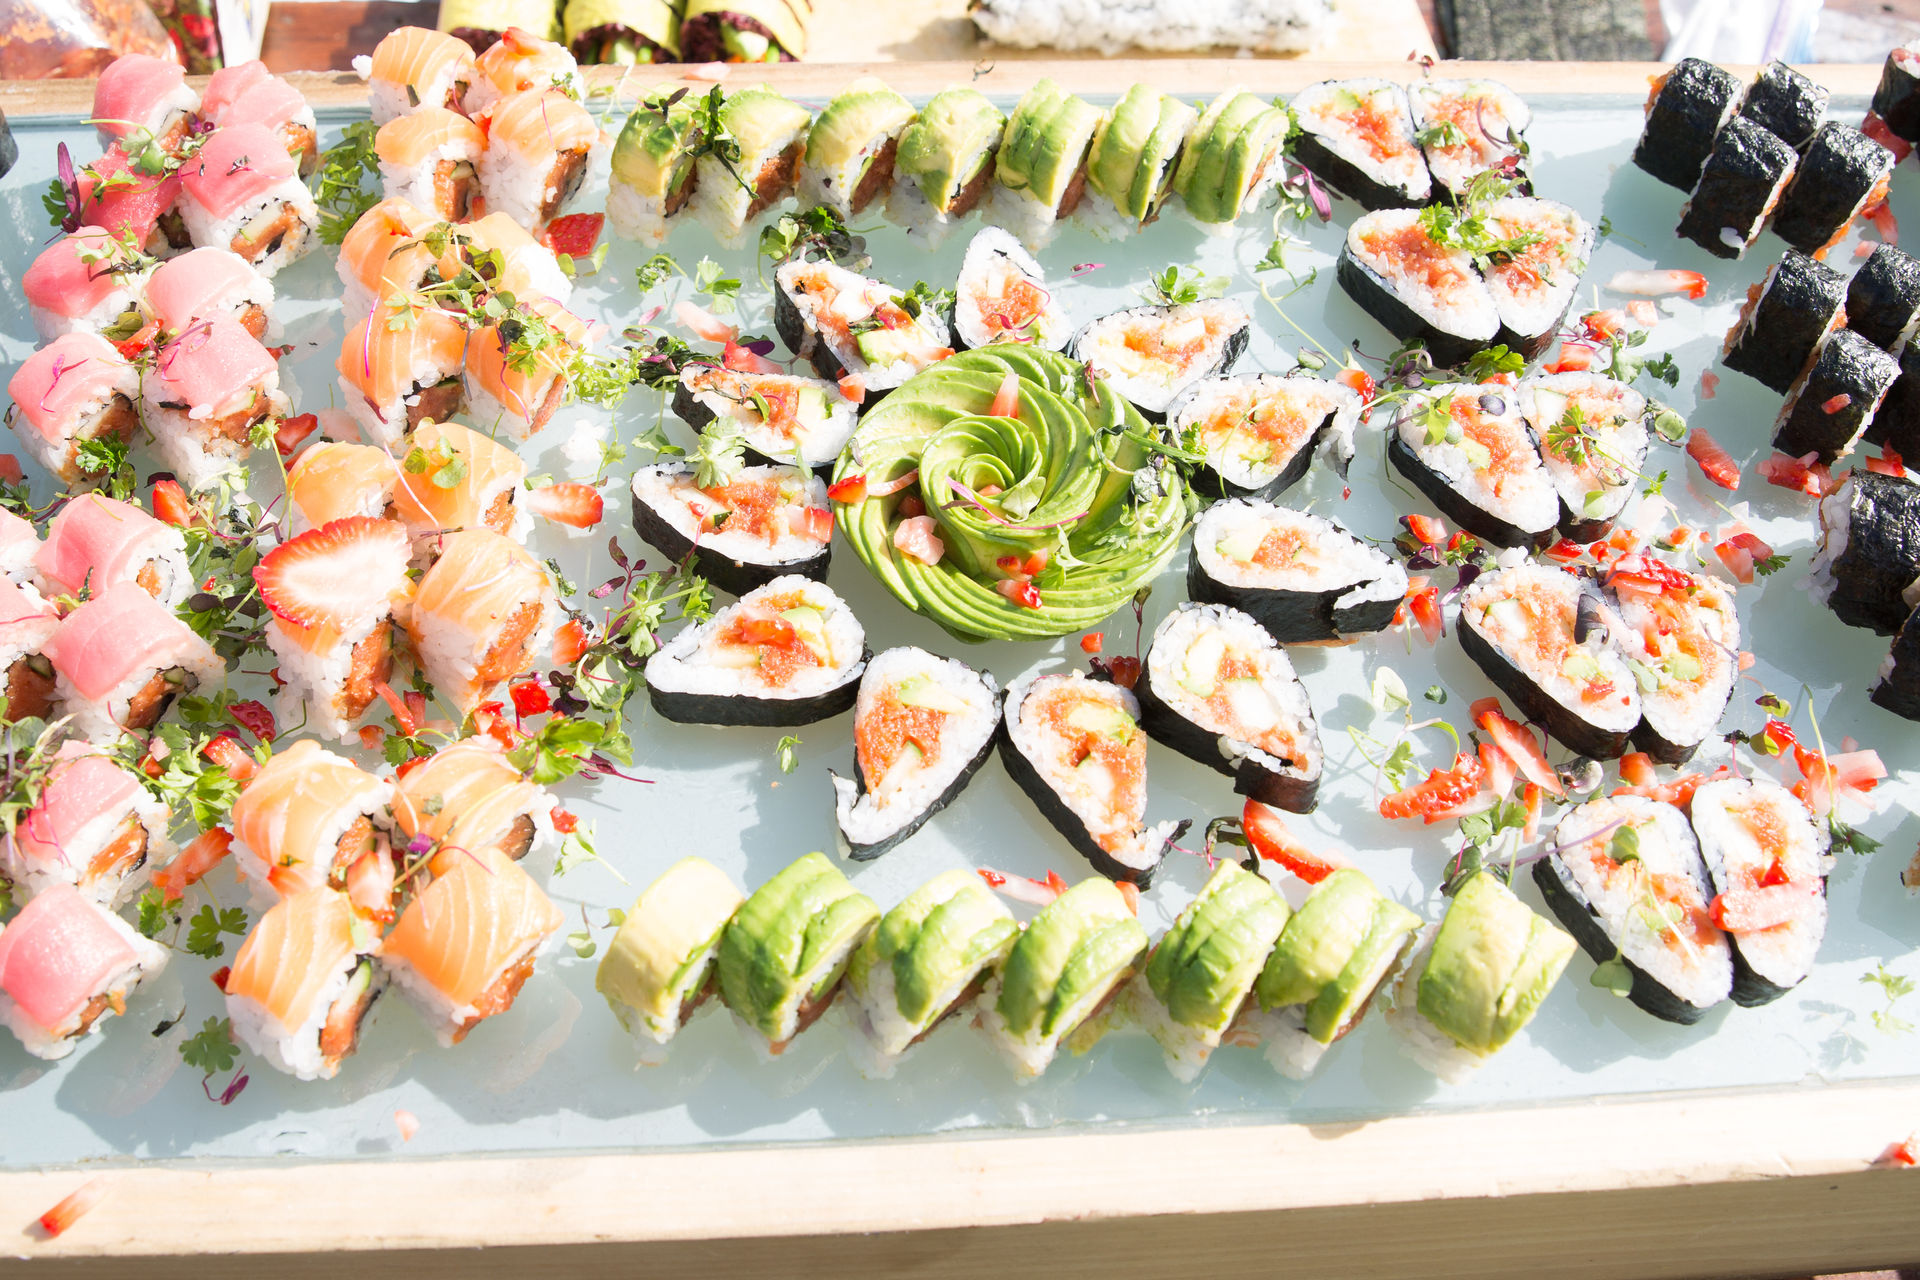 Private Sushi Bar: Impress Your Guests with a Live Action & Interactive Sushi Experience (Up to 50 People) image 1